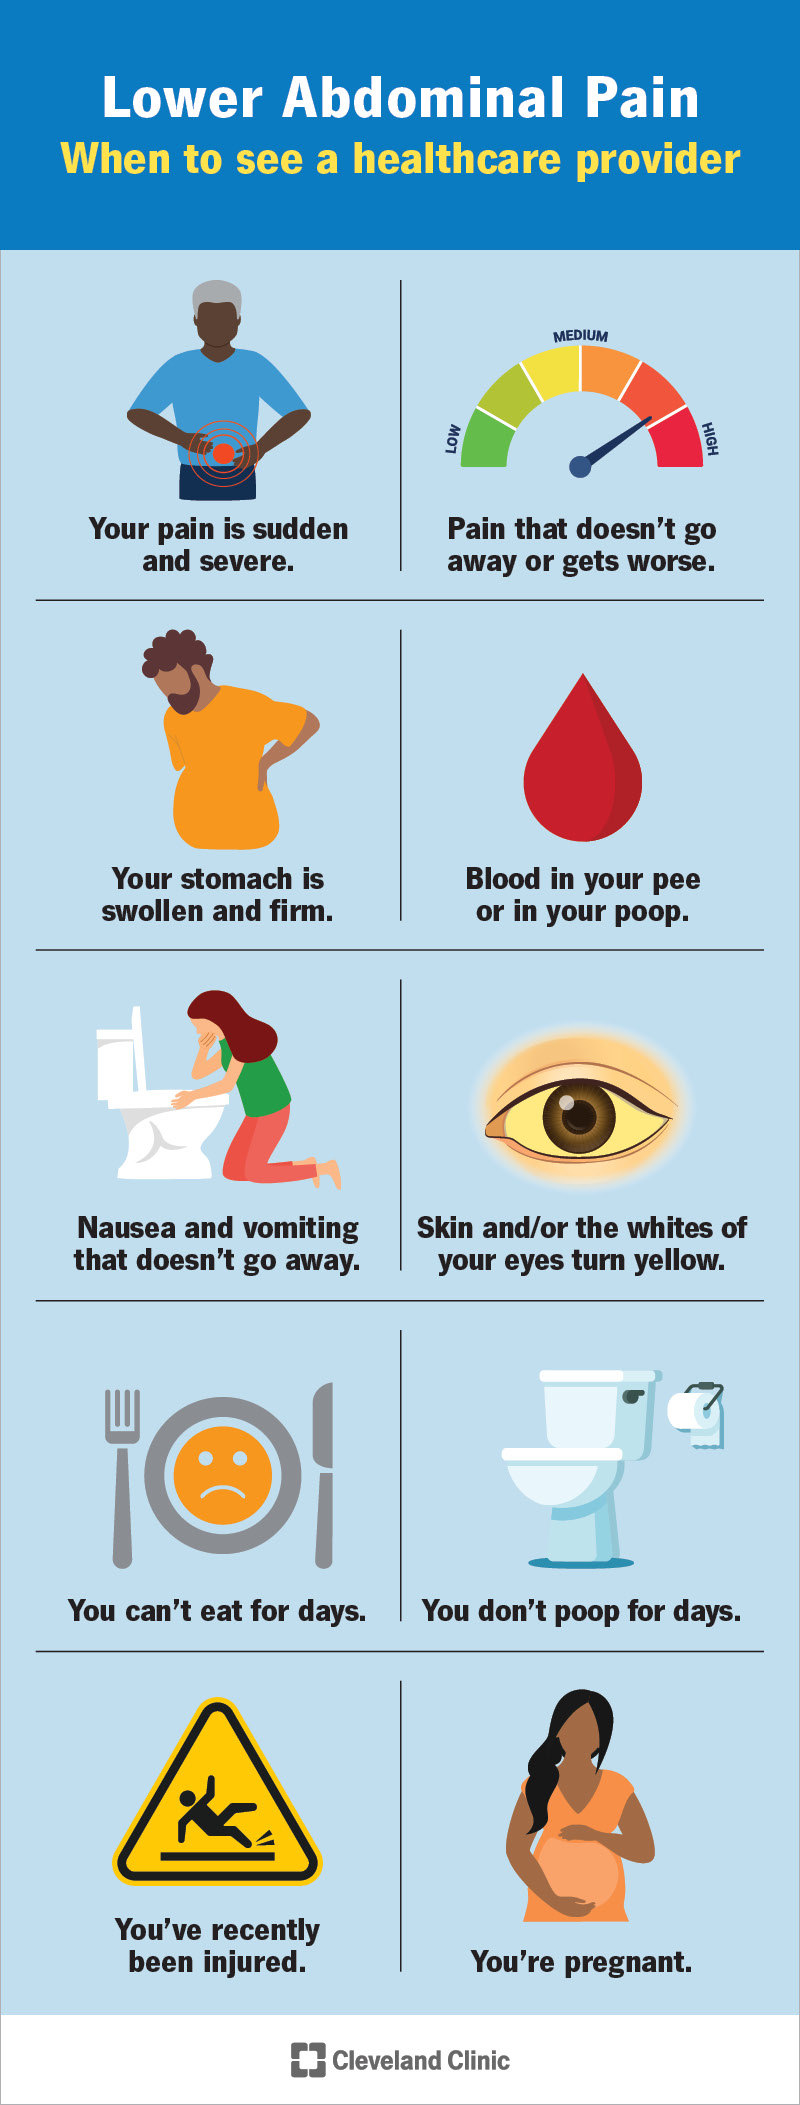 Red flag symptoms with lower abdominal pain include blood in your poop or a swollen stomach.